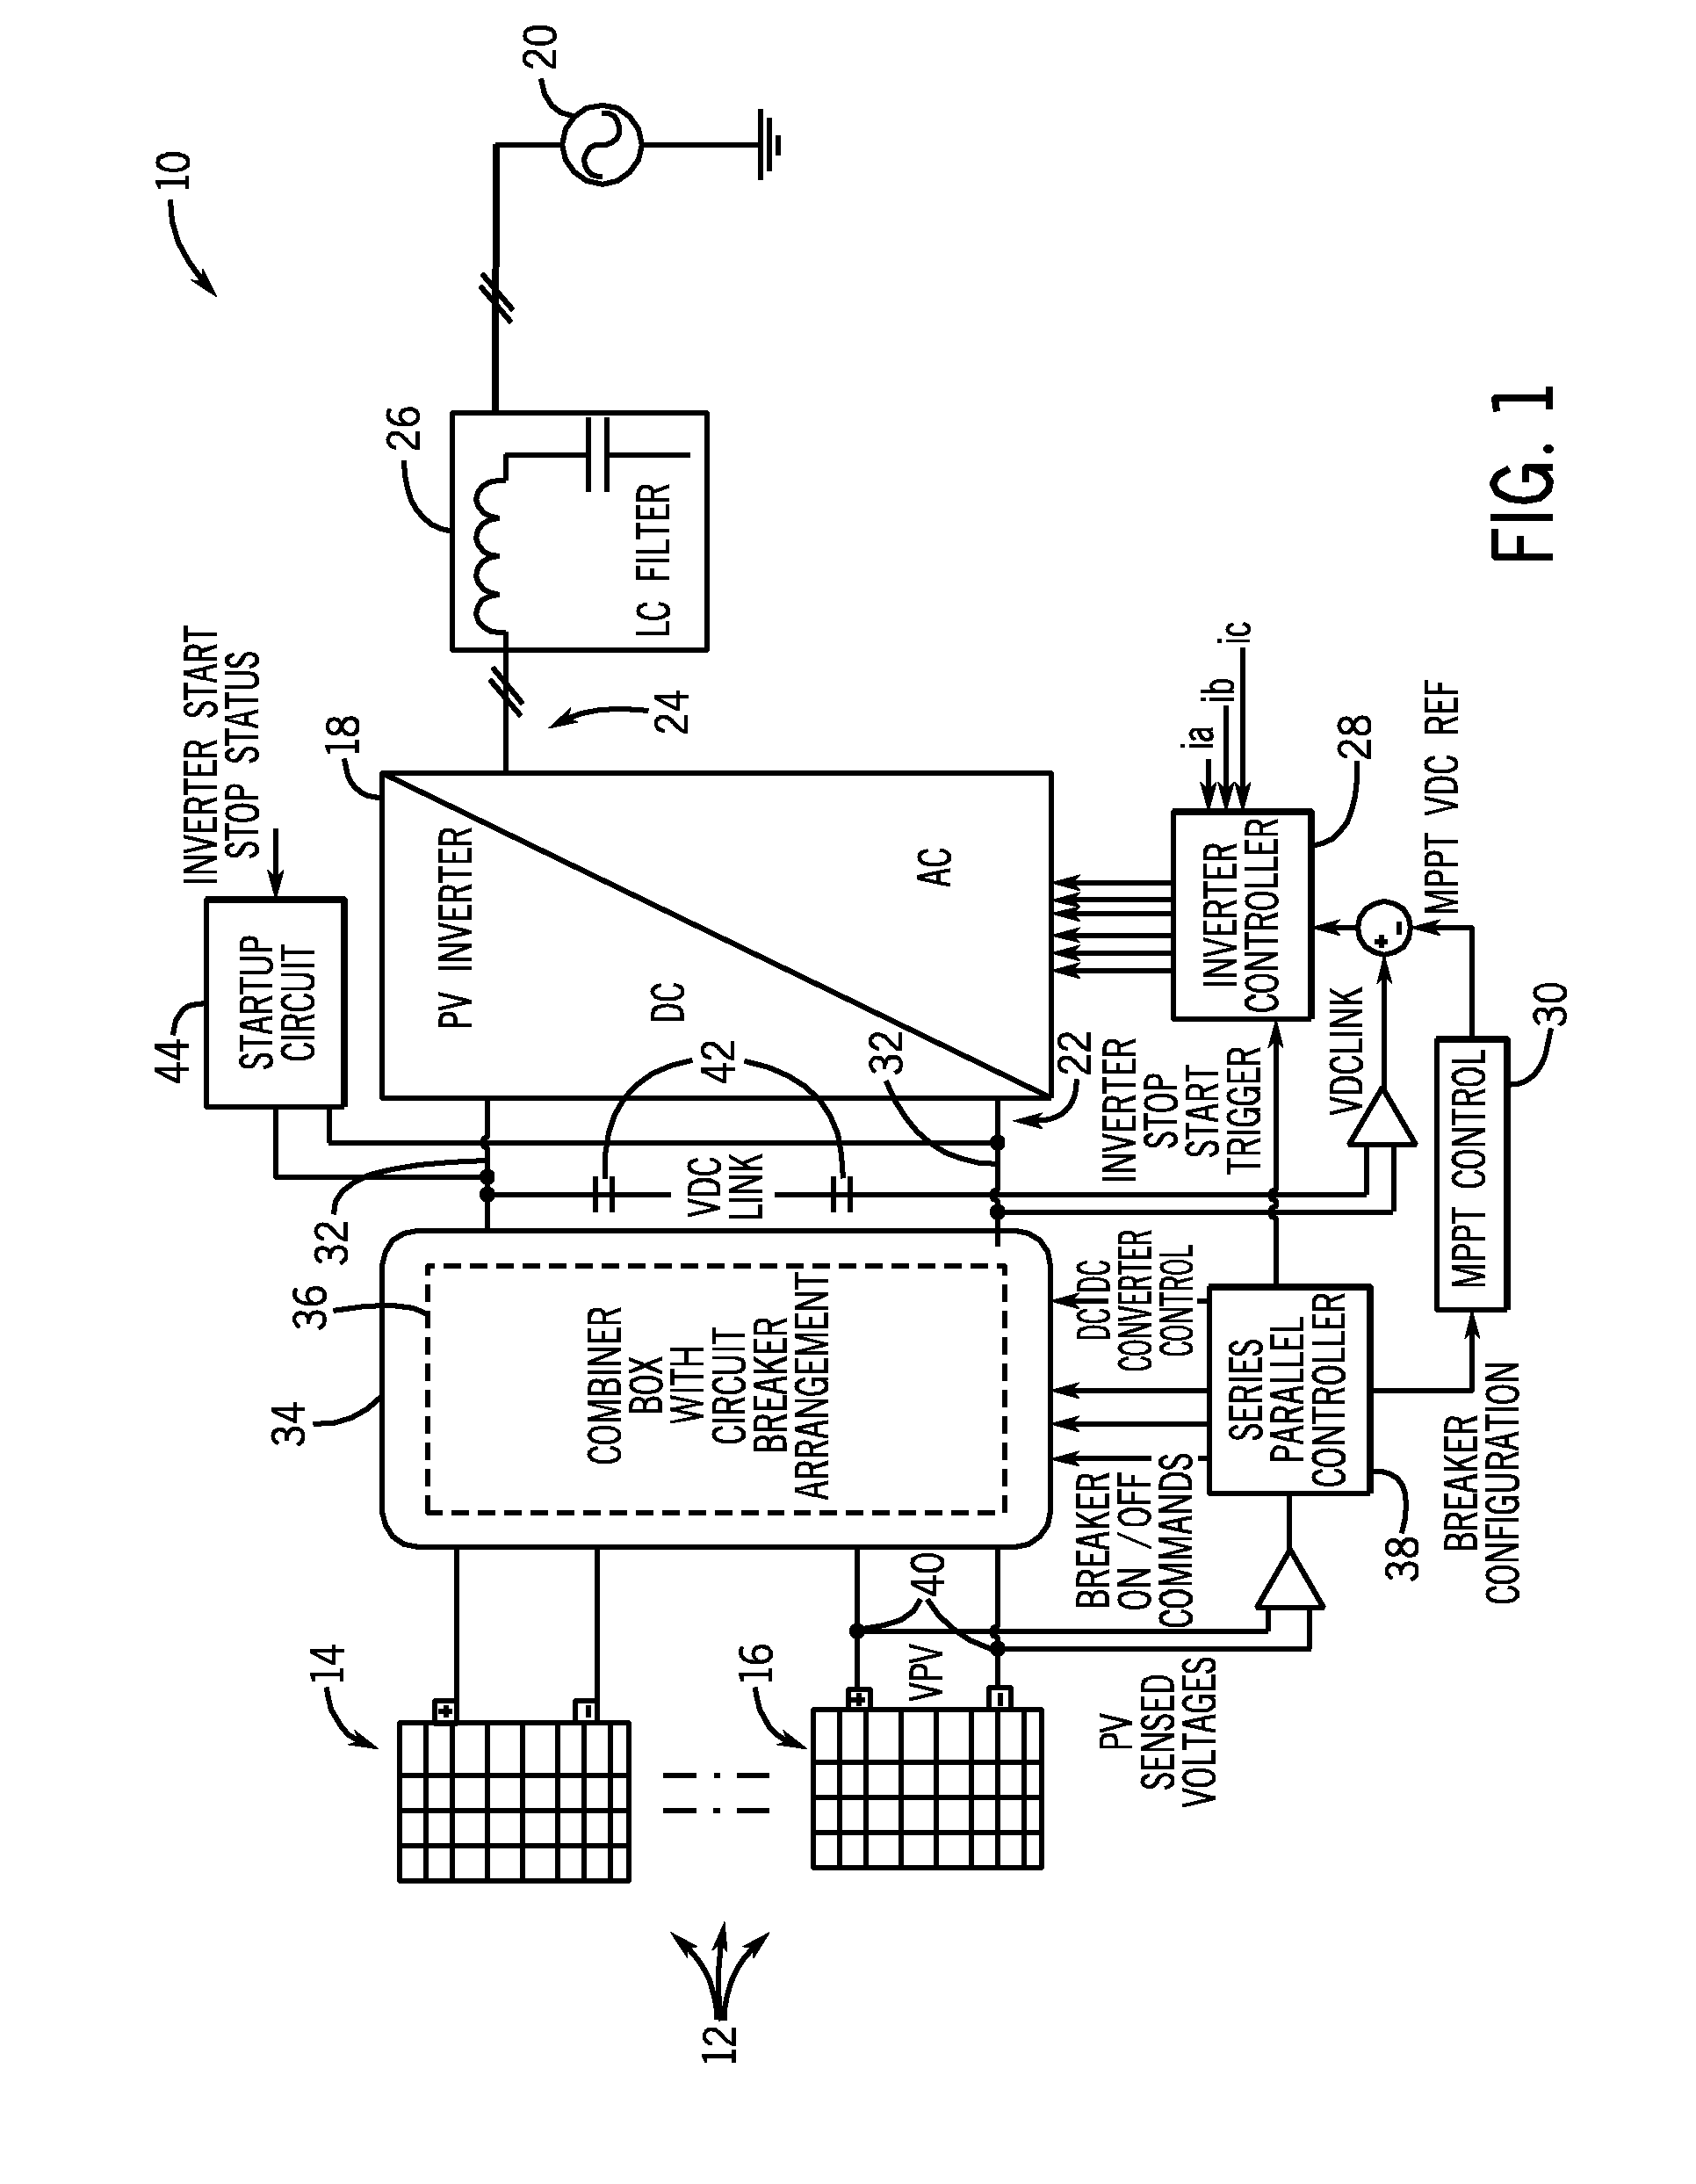 System and method for connection of photovoltaic arrays in series and parallel arrangements